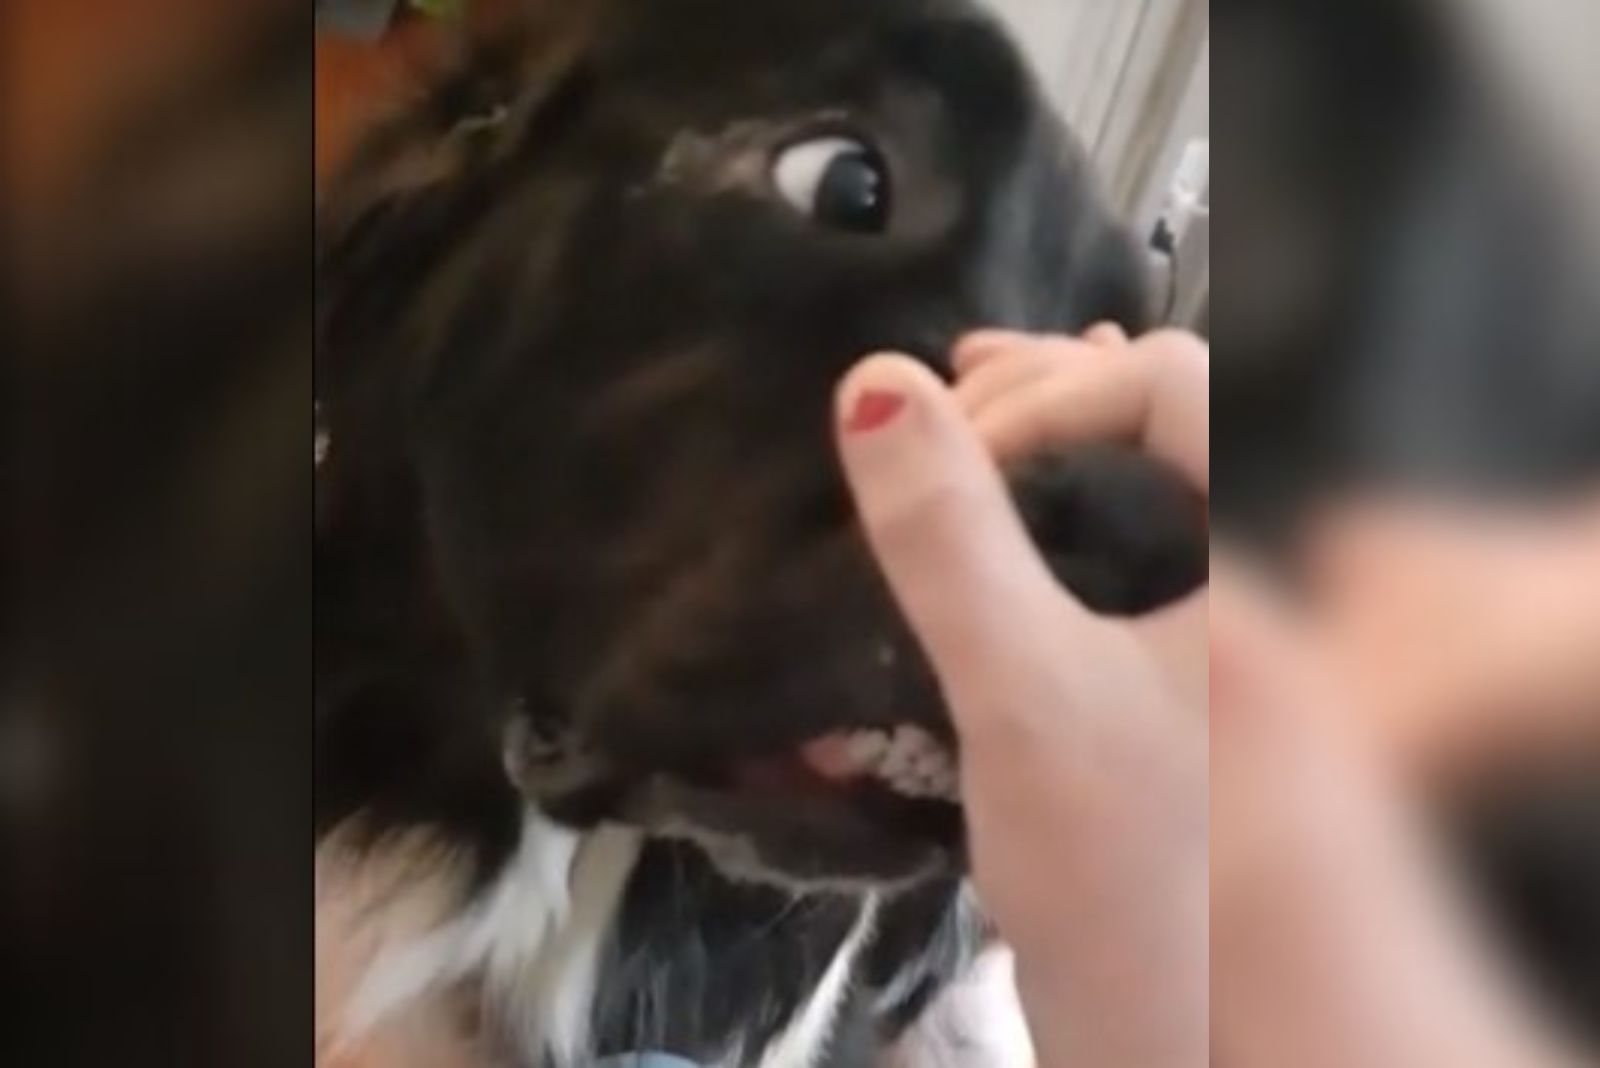 close-up photo of a hand on dog's mouth